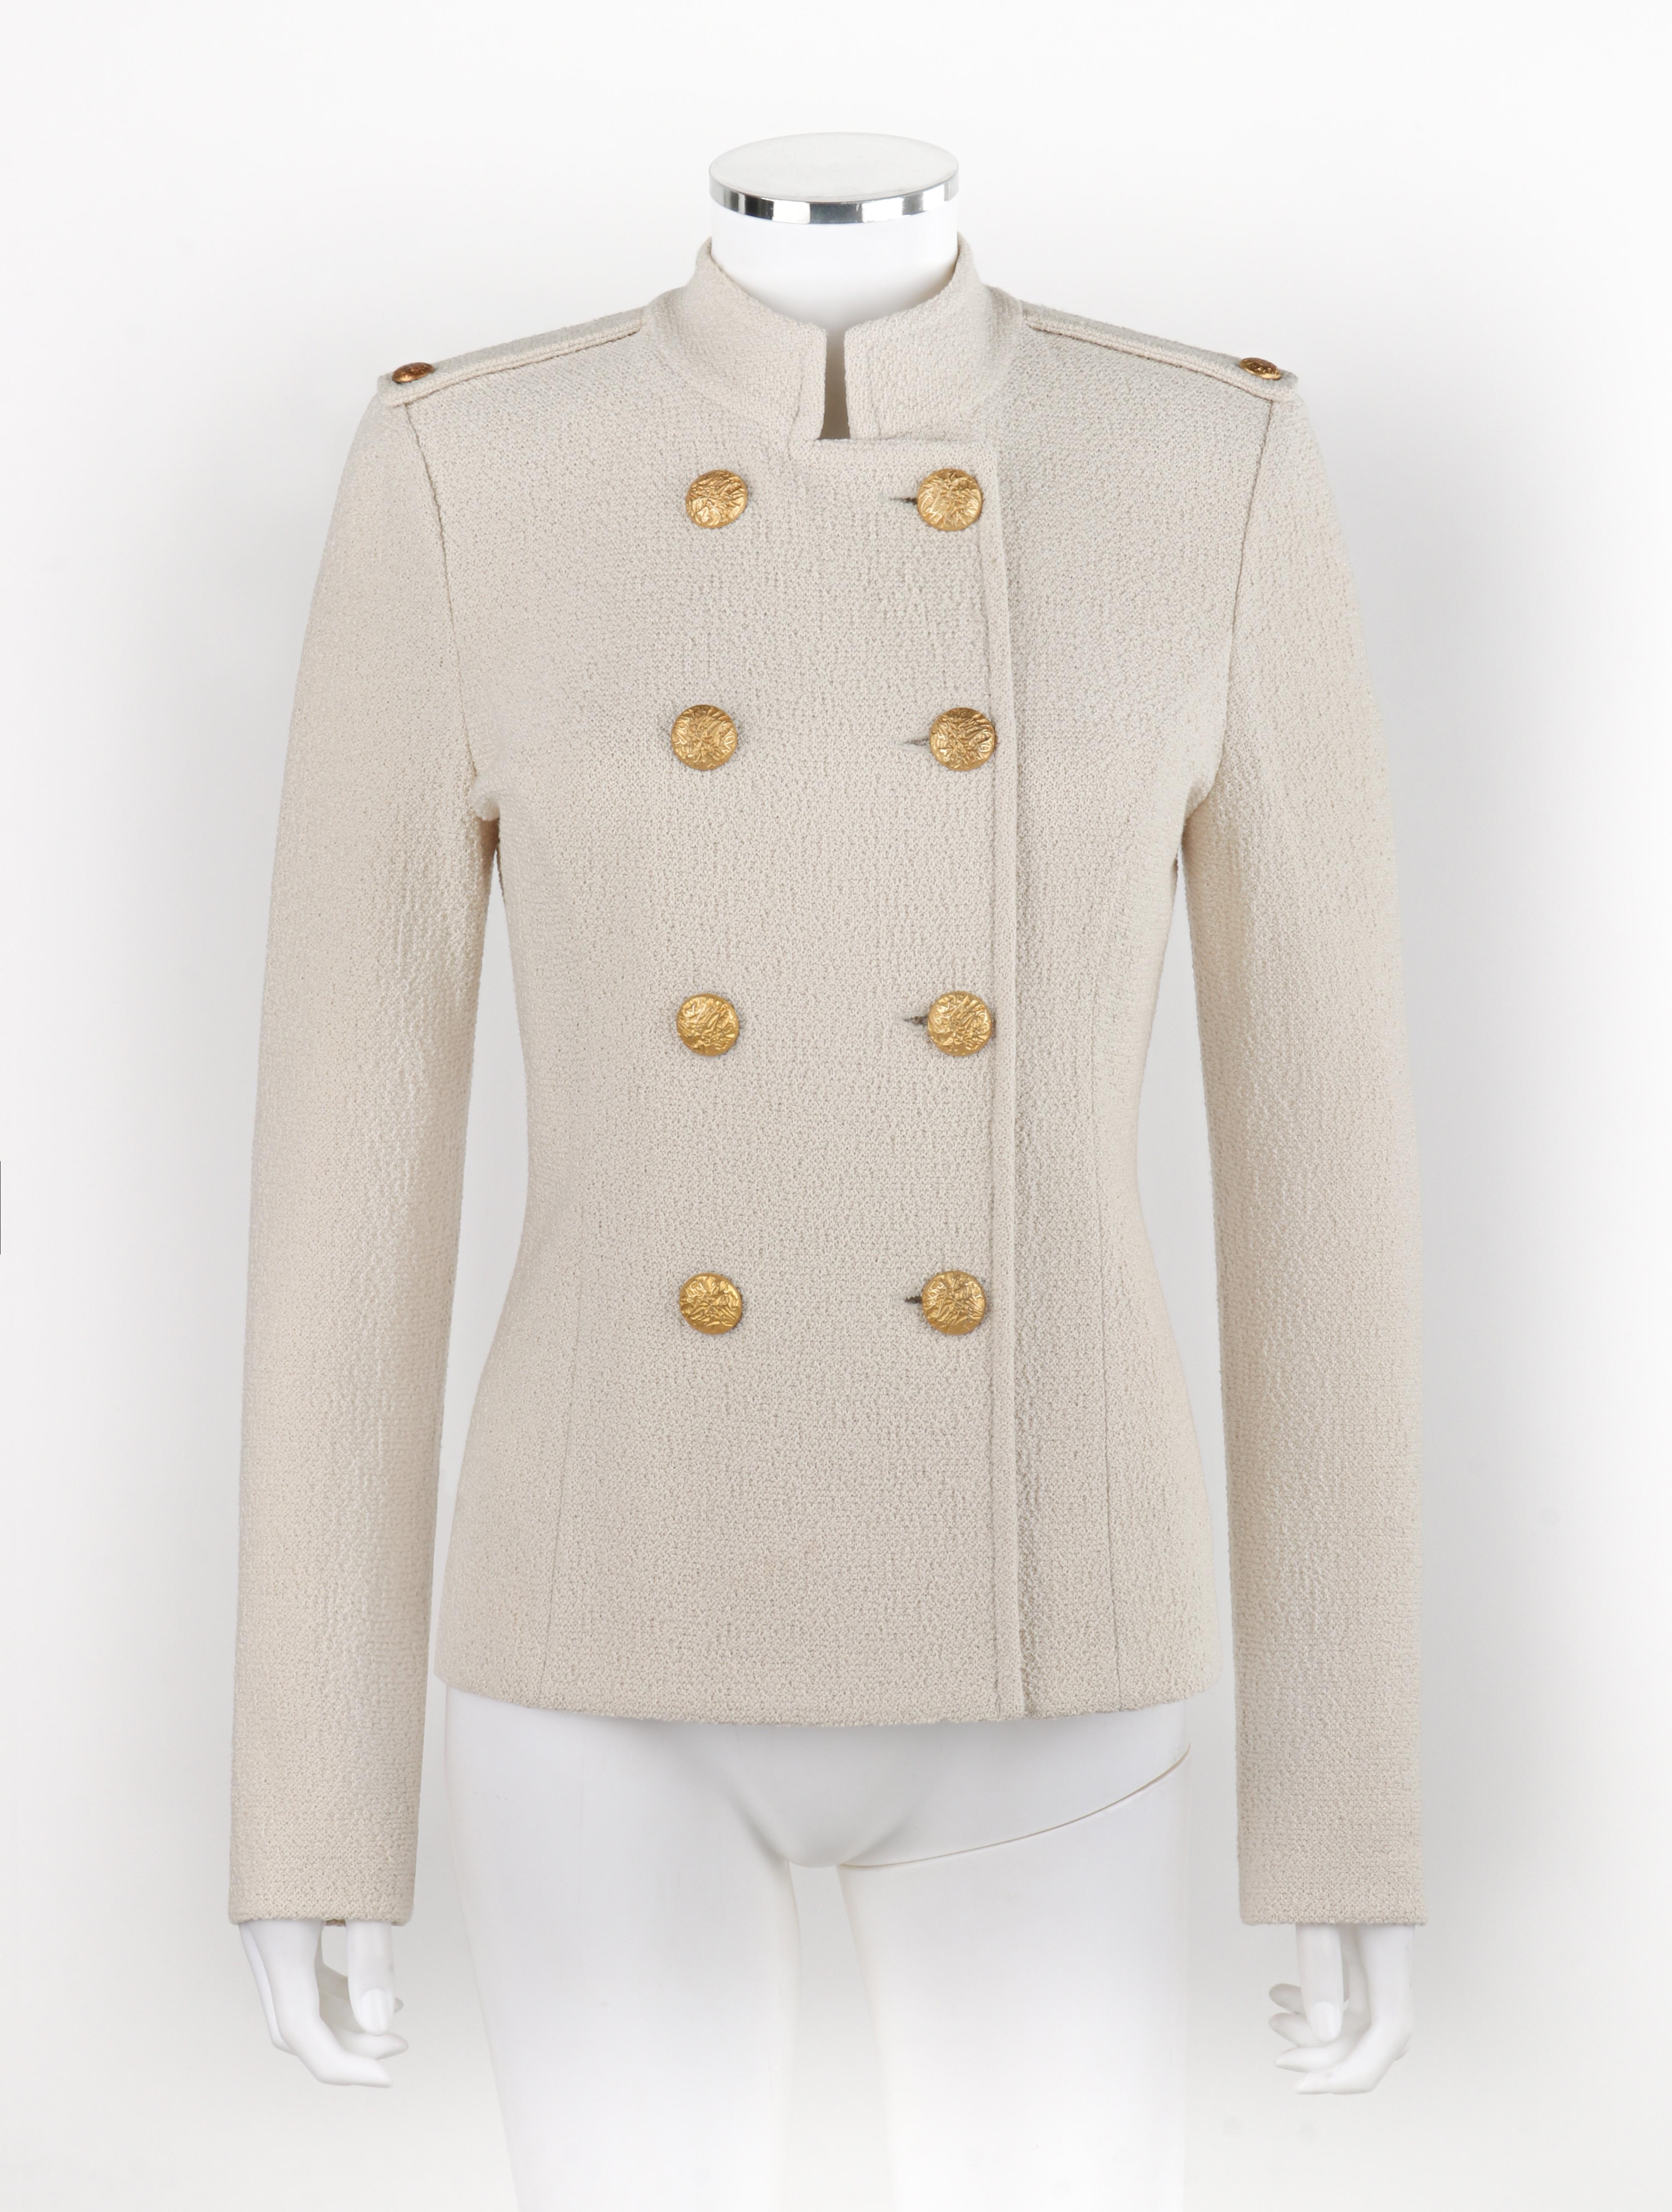 ST JOHN c.2010s Beige Knit Stand Collar Military Double-Breasted Blazer Jacket

Brand / Manufacturer: St. John
Circa: 2010s
Designer: Zoe Turner
Style: Double-breasted blazer jacket
Color(s): Shades of beige, gold
Lined: No
Unmarked Fabric Content